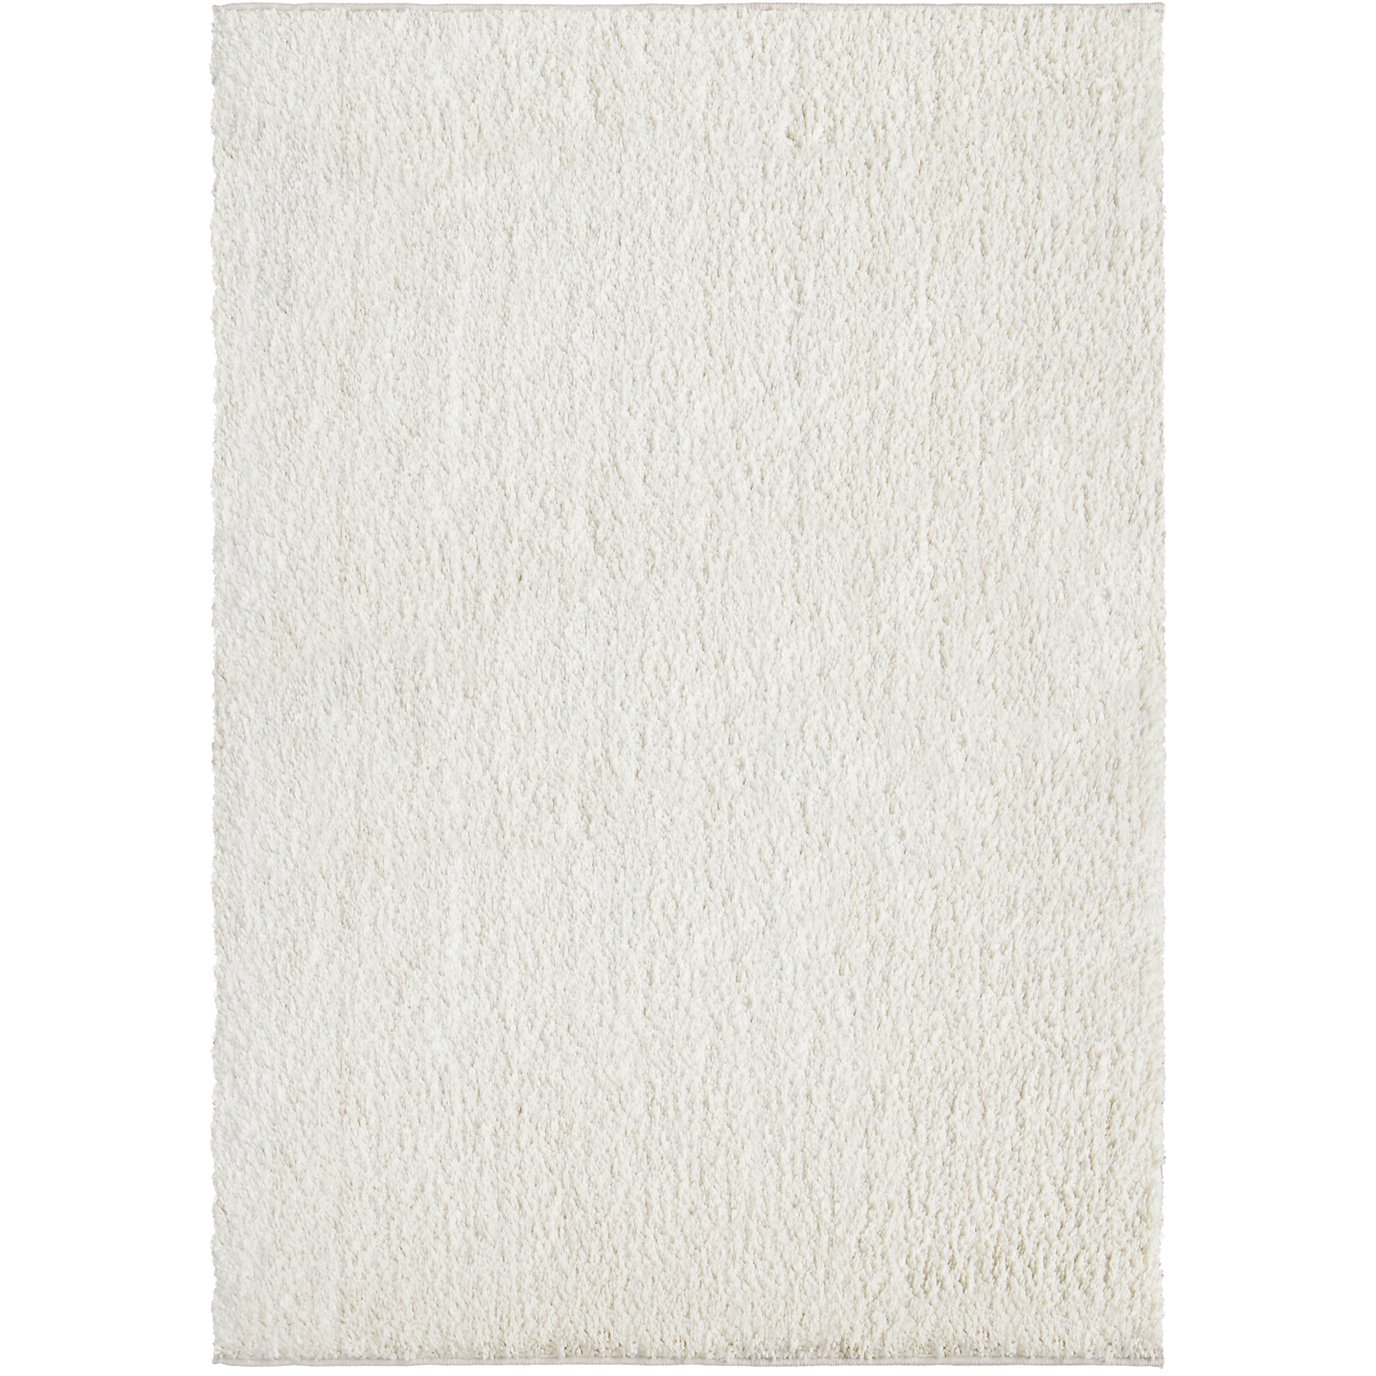 Solid White 9' x 13' Rug